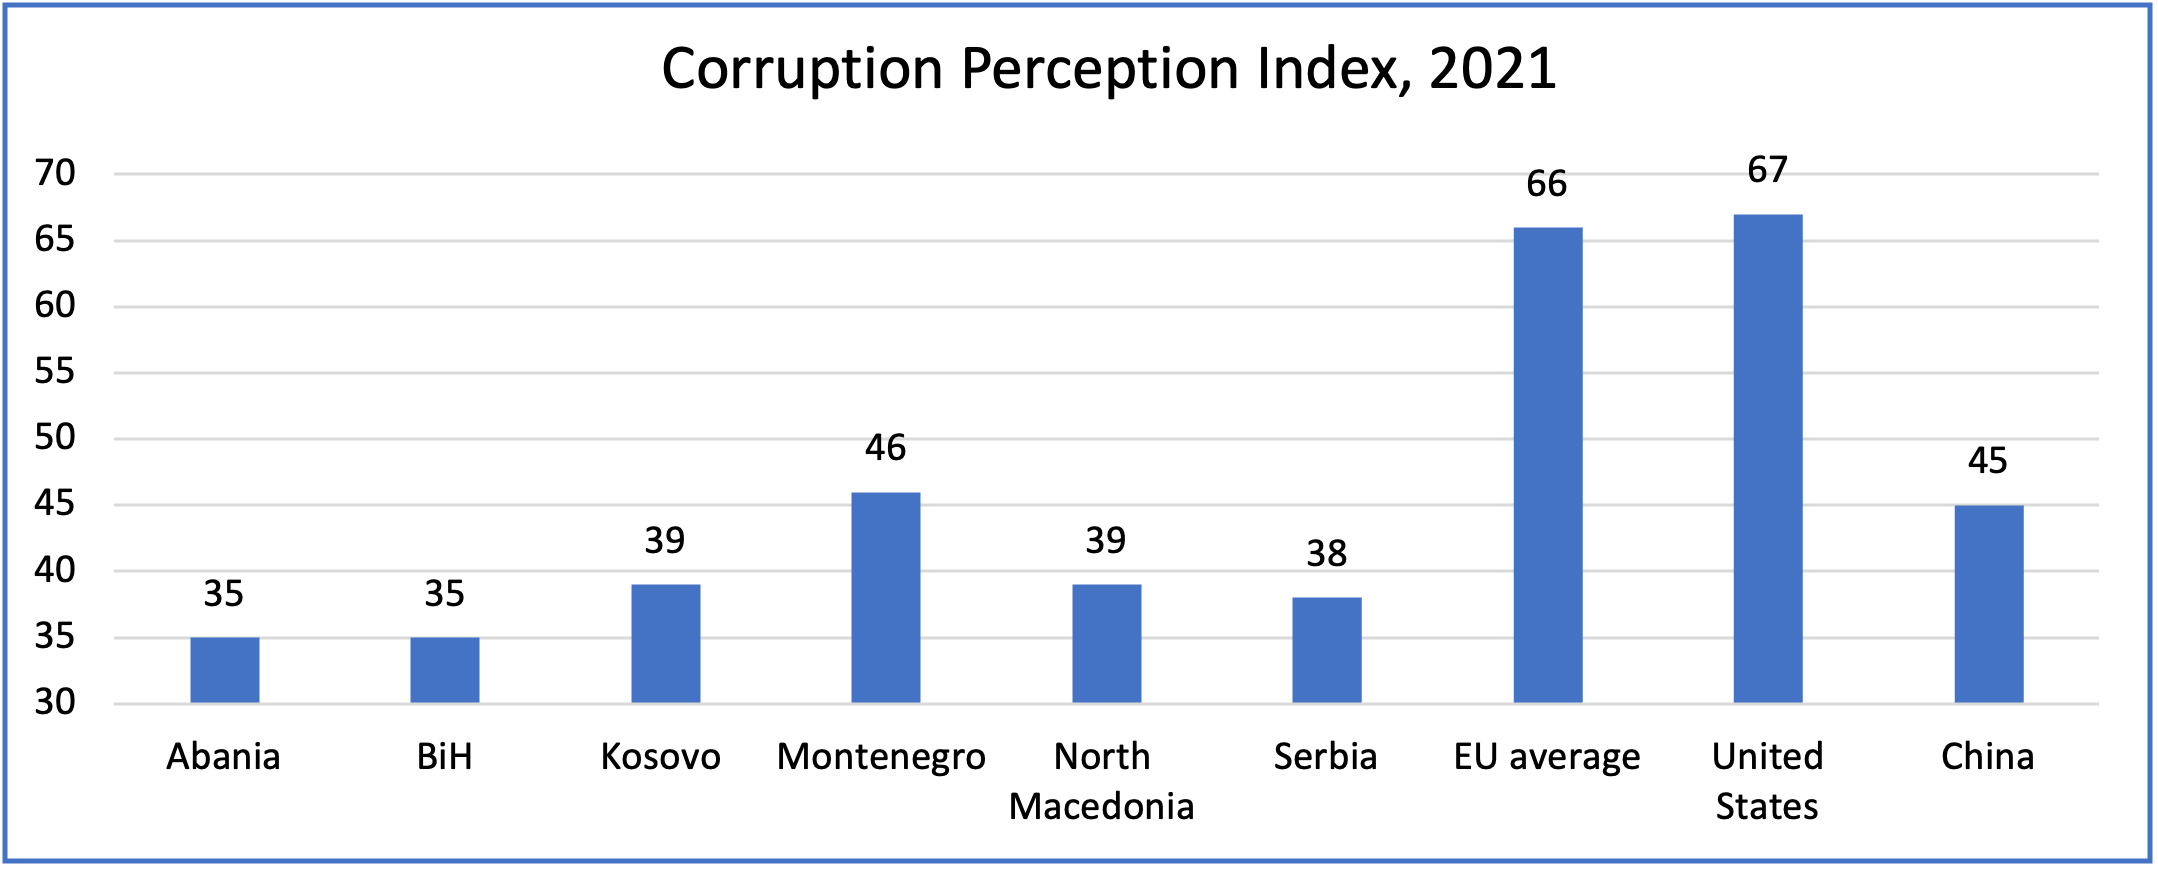 Corruption scores in the Western Balkans compared to EU average, the United States, and China 